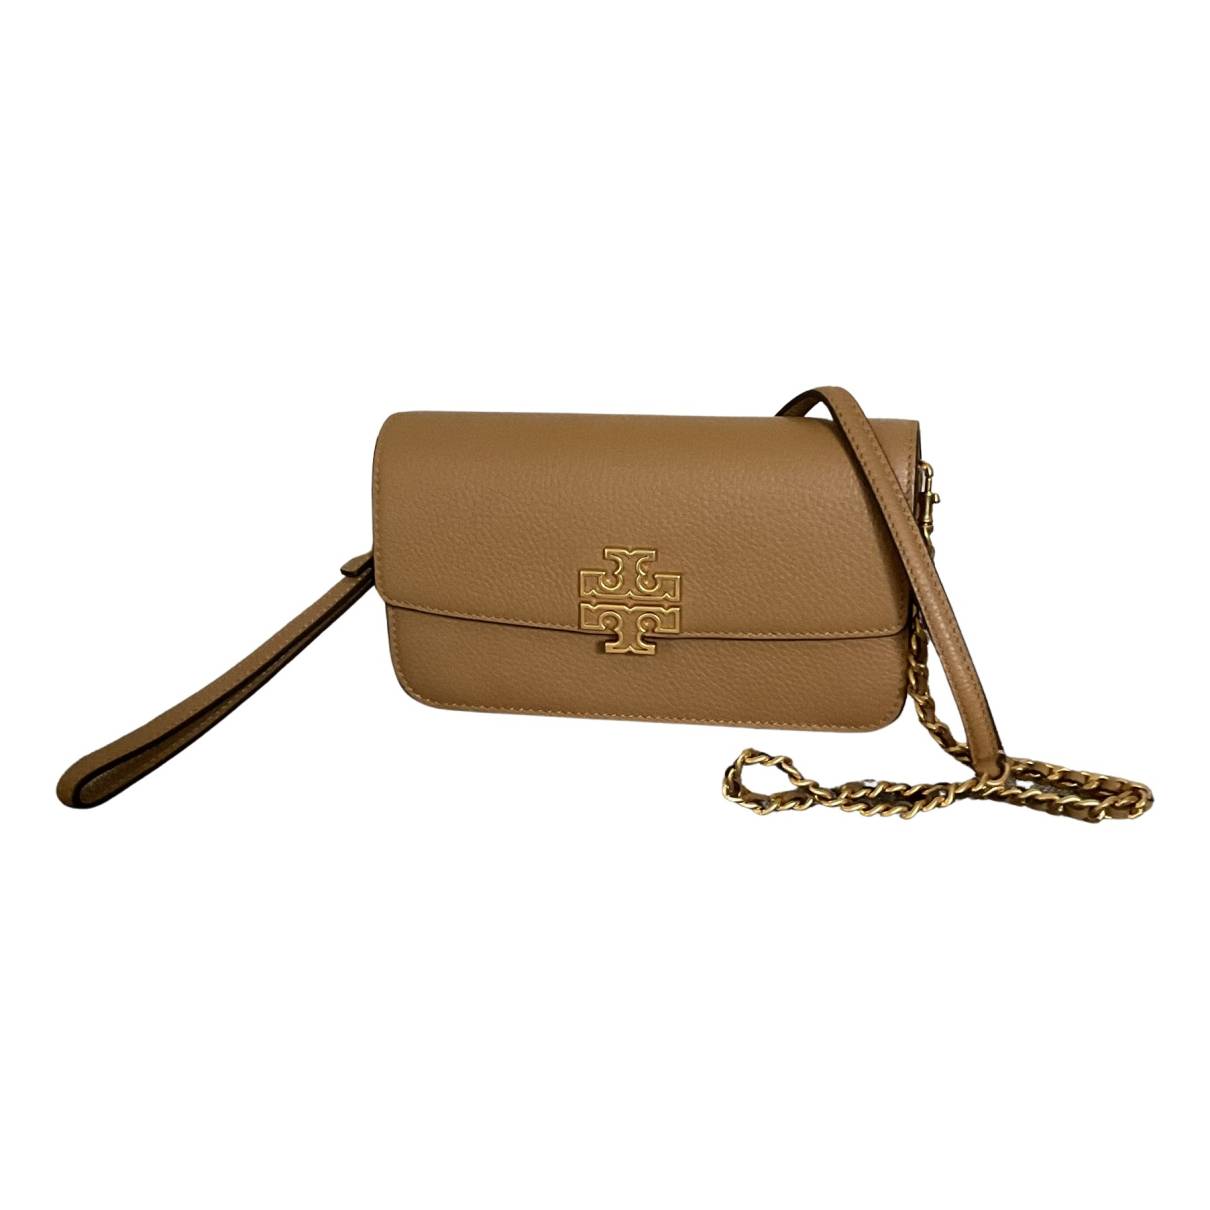 Leather crossbody bag Tory Burch Camel in Leather - 29897406